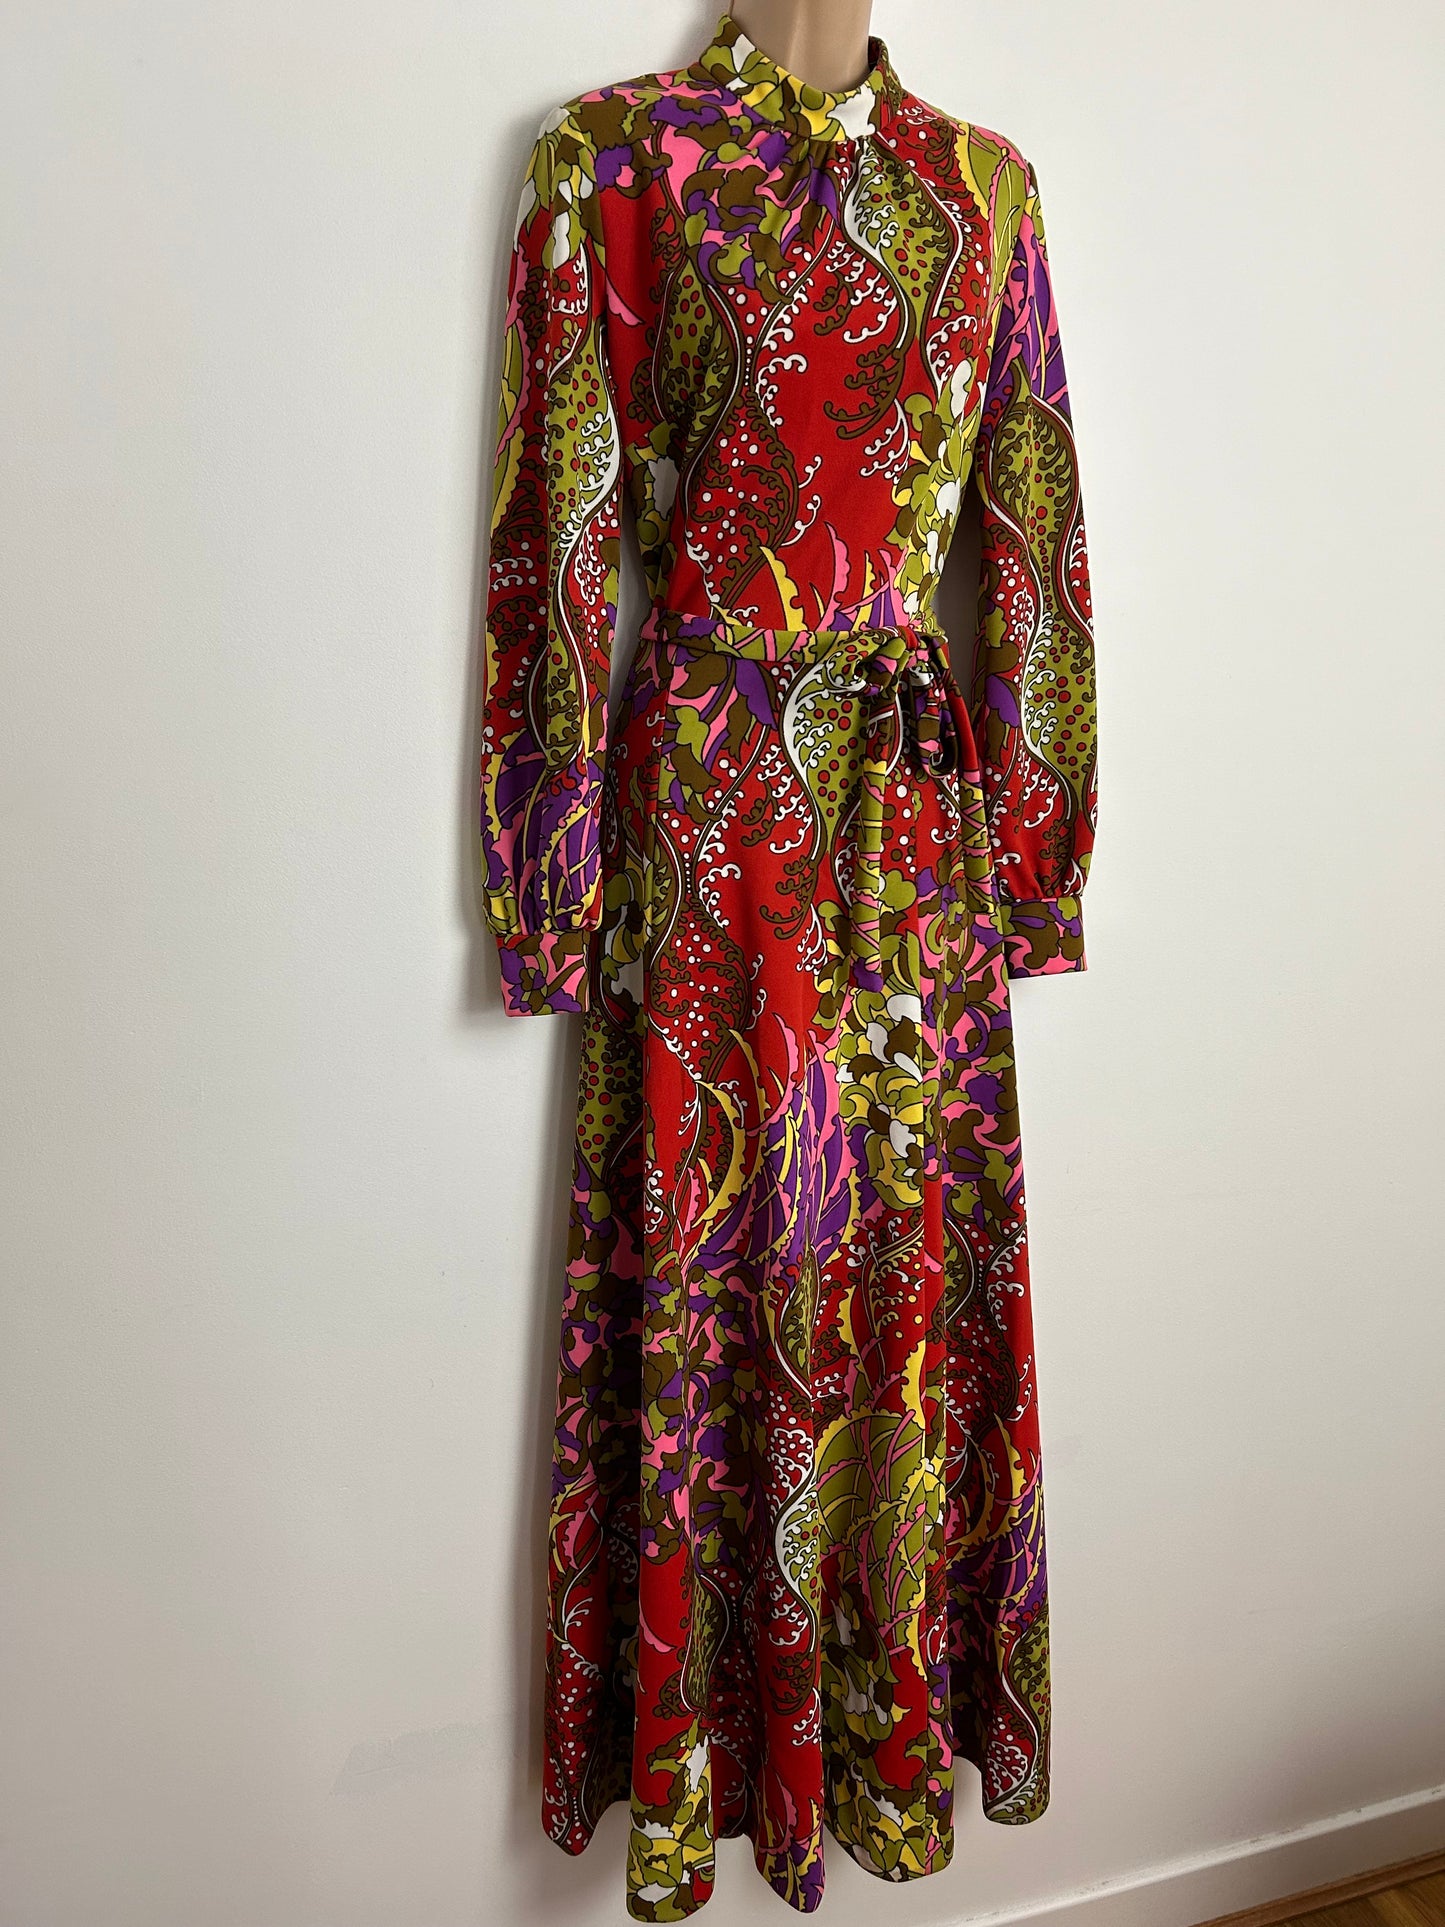 Vintage 1970s UK Size 10 STUNNING Red Green Pink & Purple Nouveau Inspired Long Sleeve Belted Maxi Dress